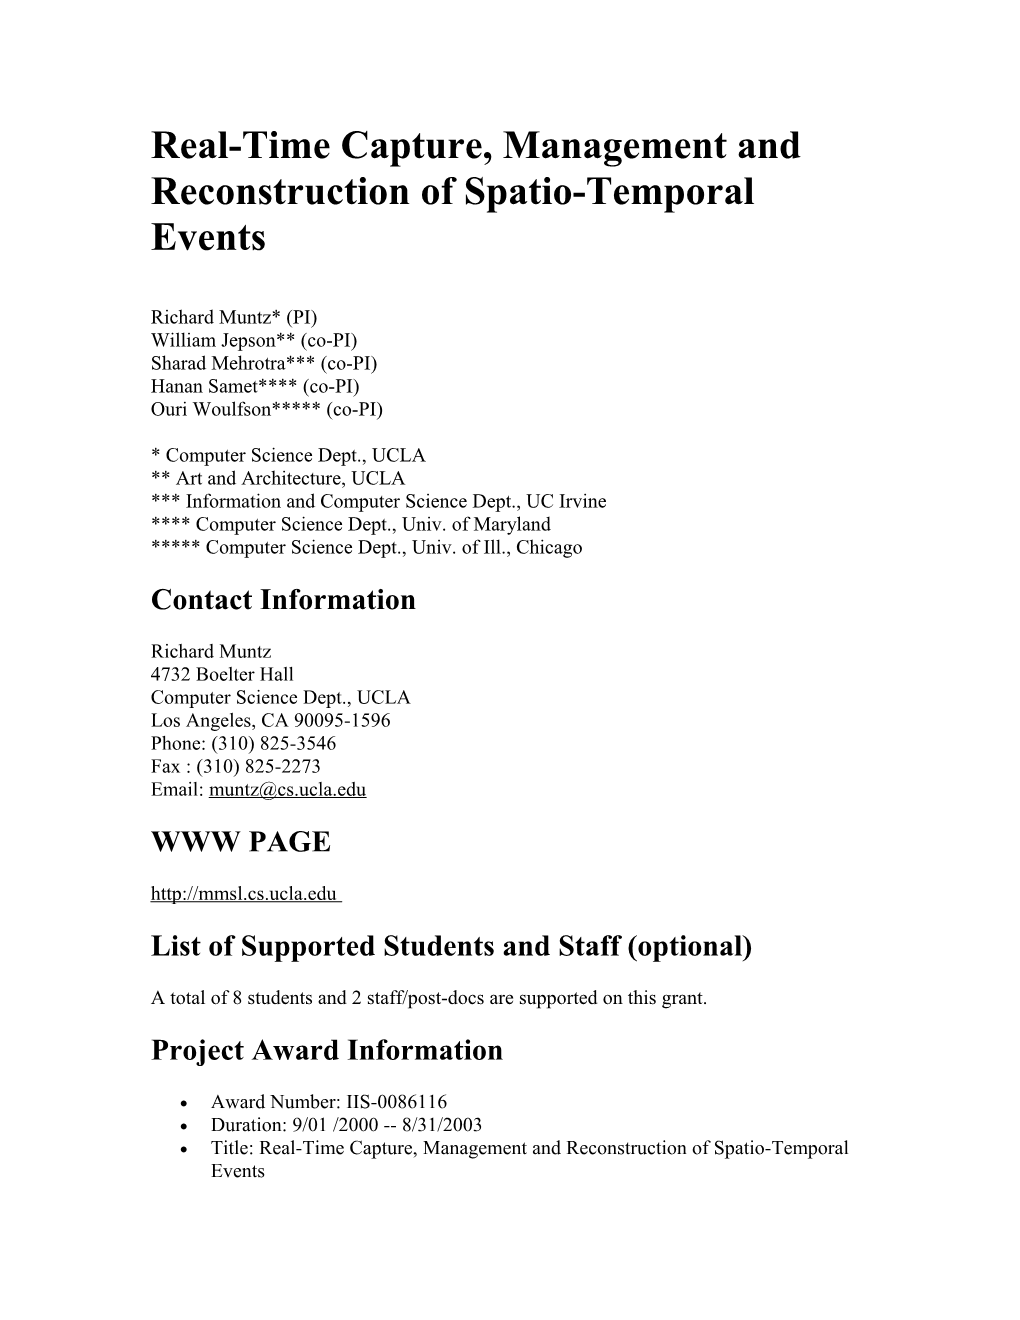 Real-Time Capture, Management and Reconstruction of Spatio-Temporal Events